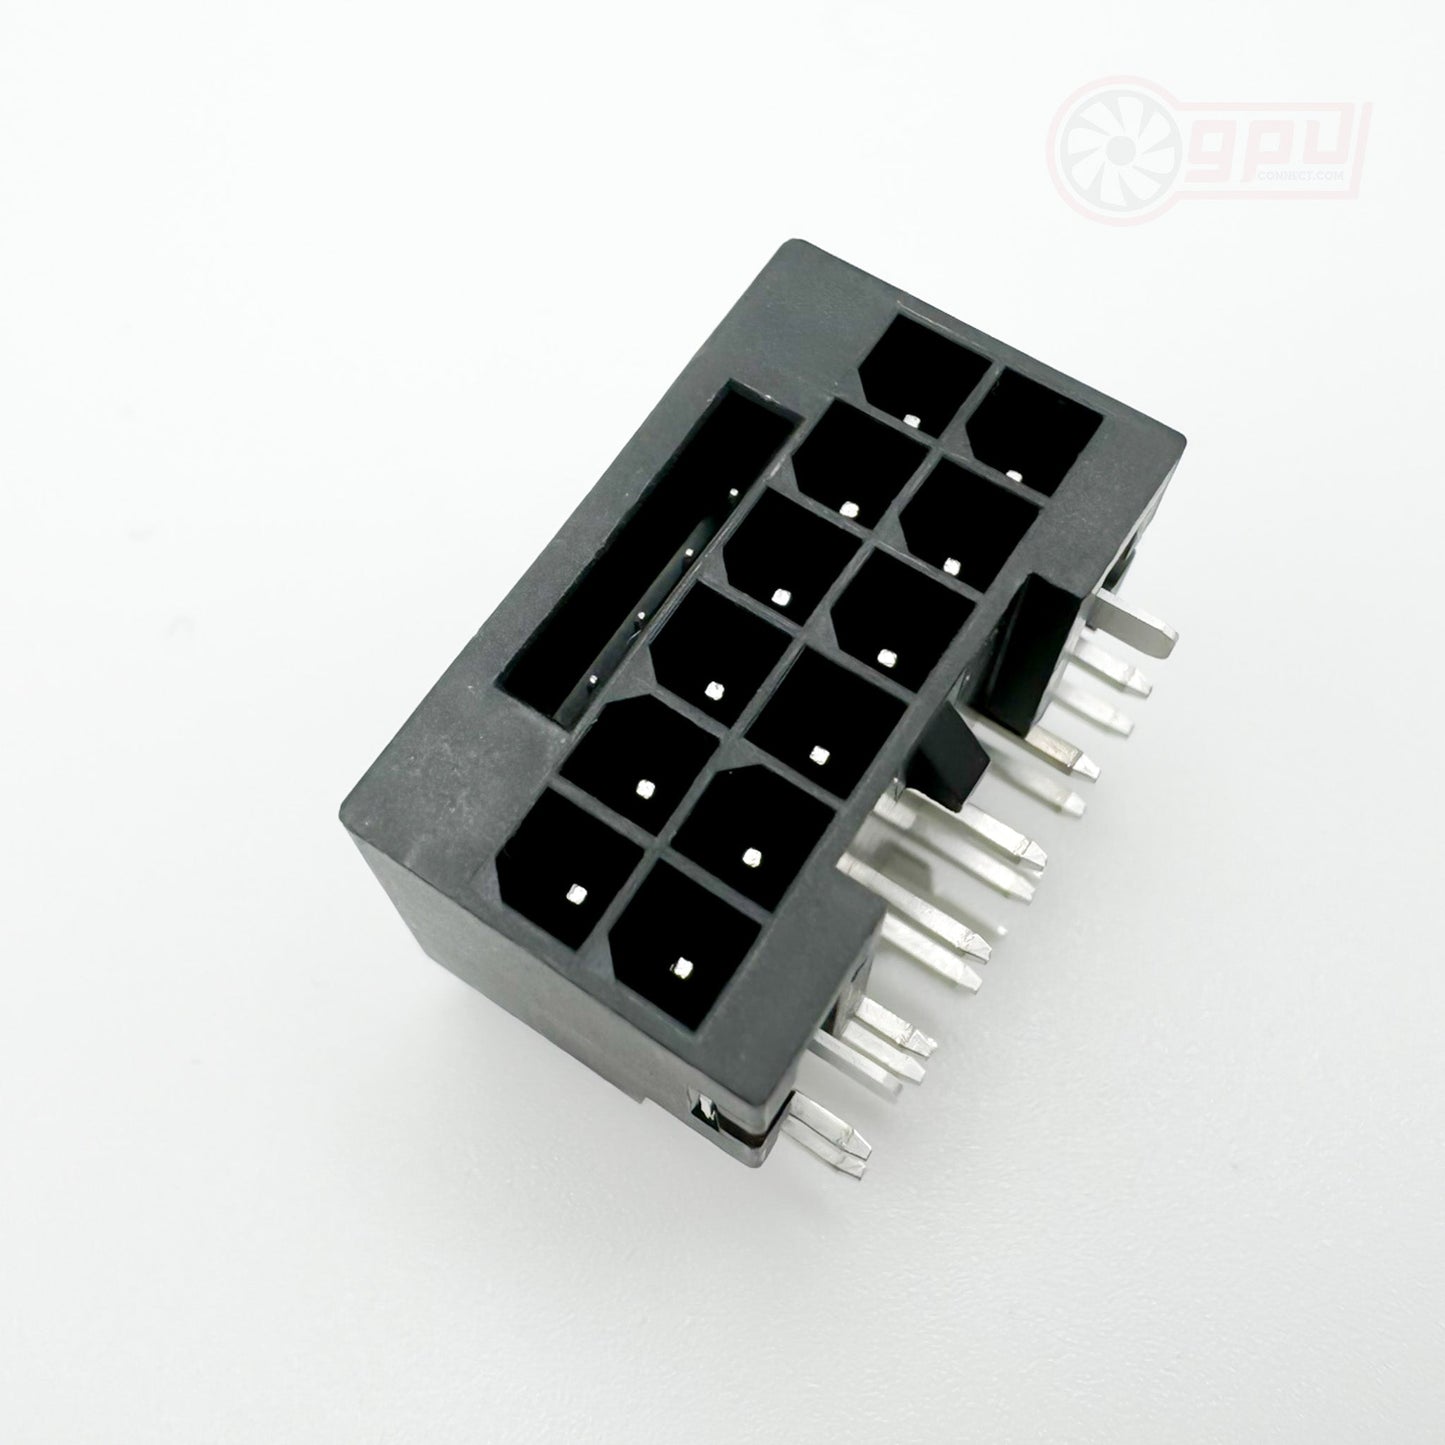 16Pin (12+4) PCI-E HPWR Power Connector Replacement Socket Header - GPUCONNECT.COM